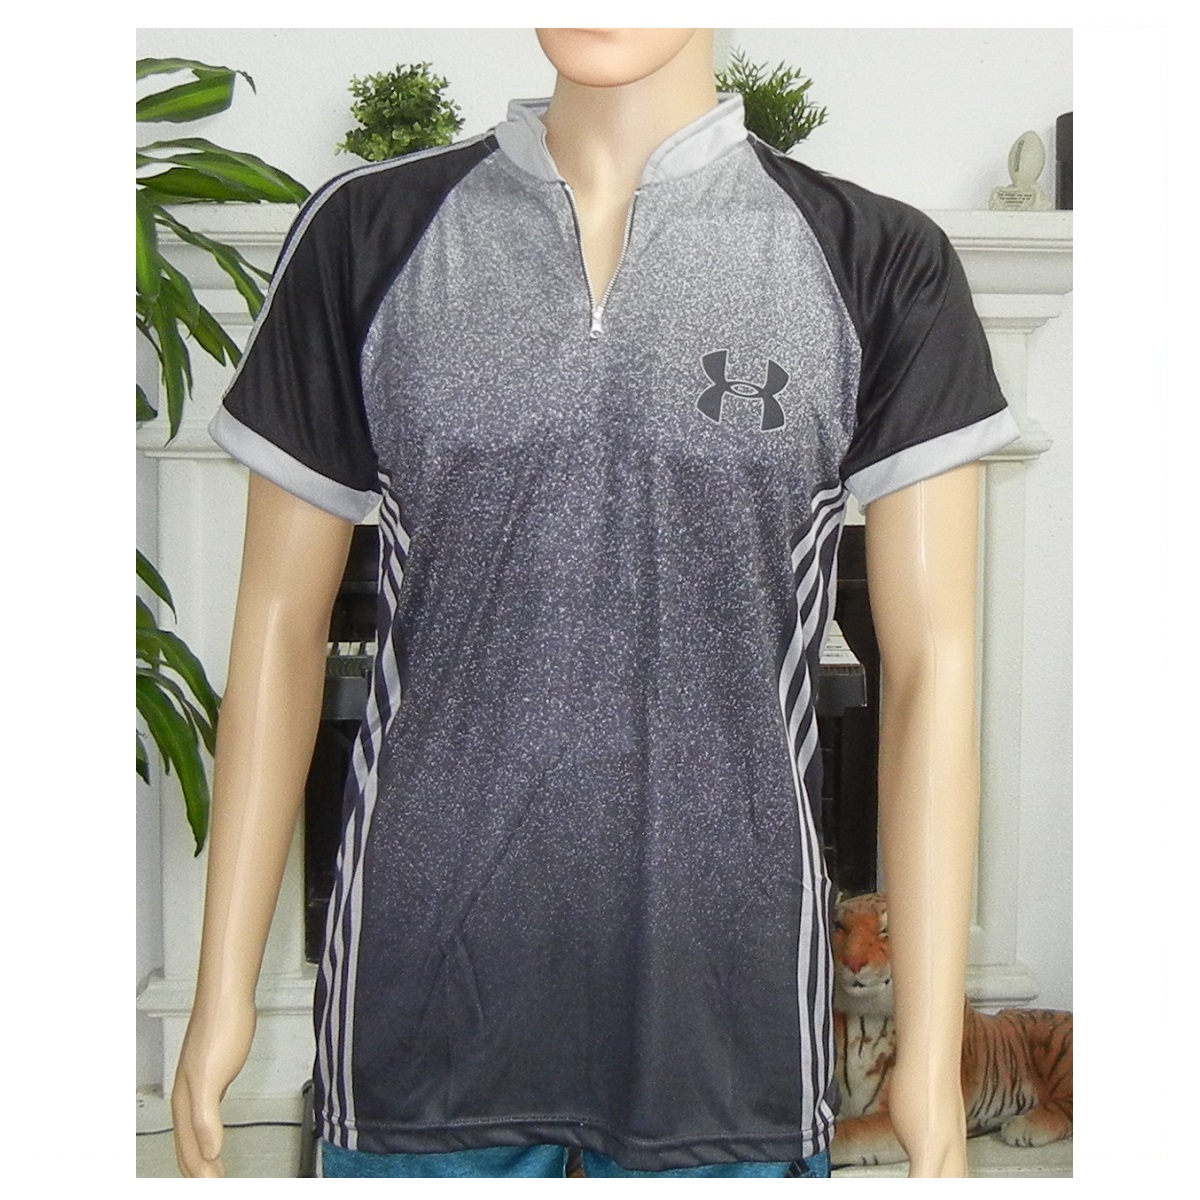 Sublimated T-Shirt for Men, Elegant Colorful gradient design with Stripes, gray